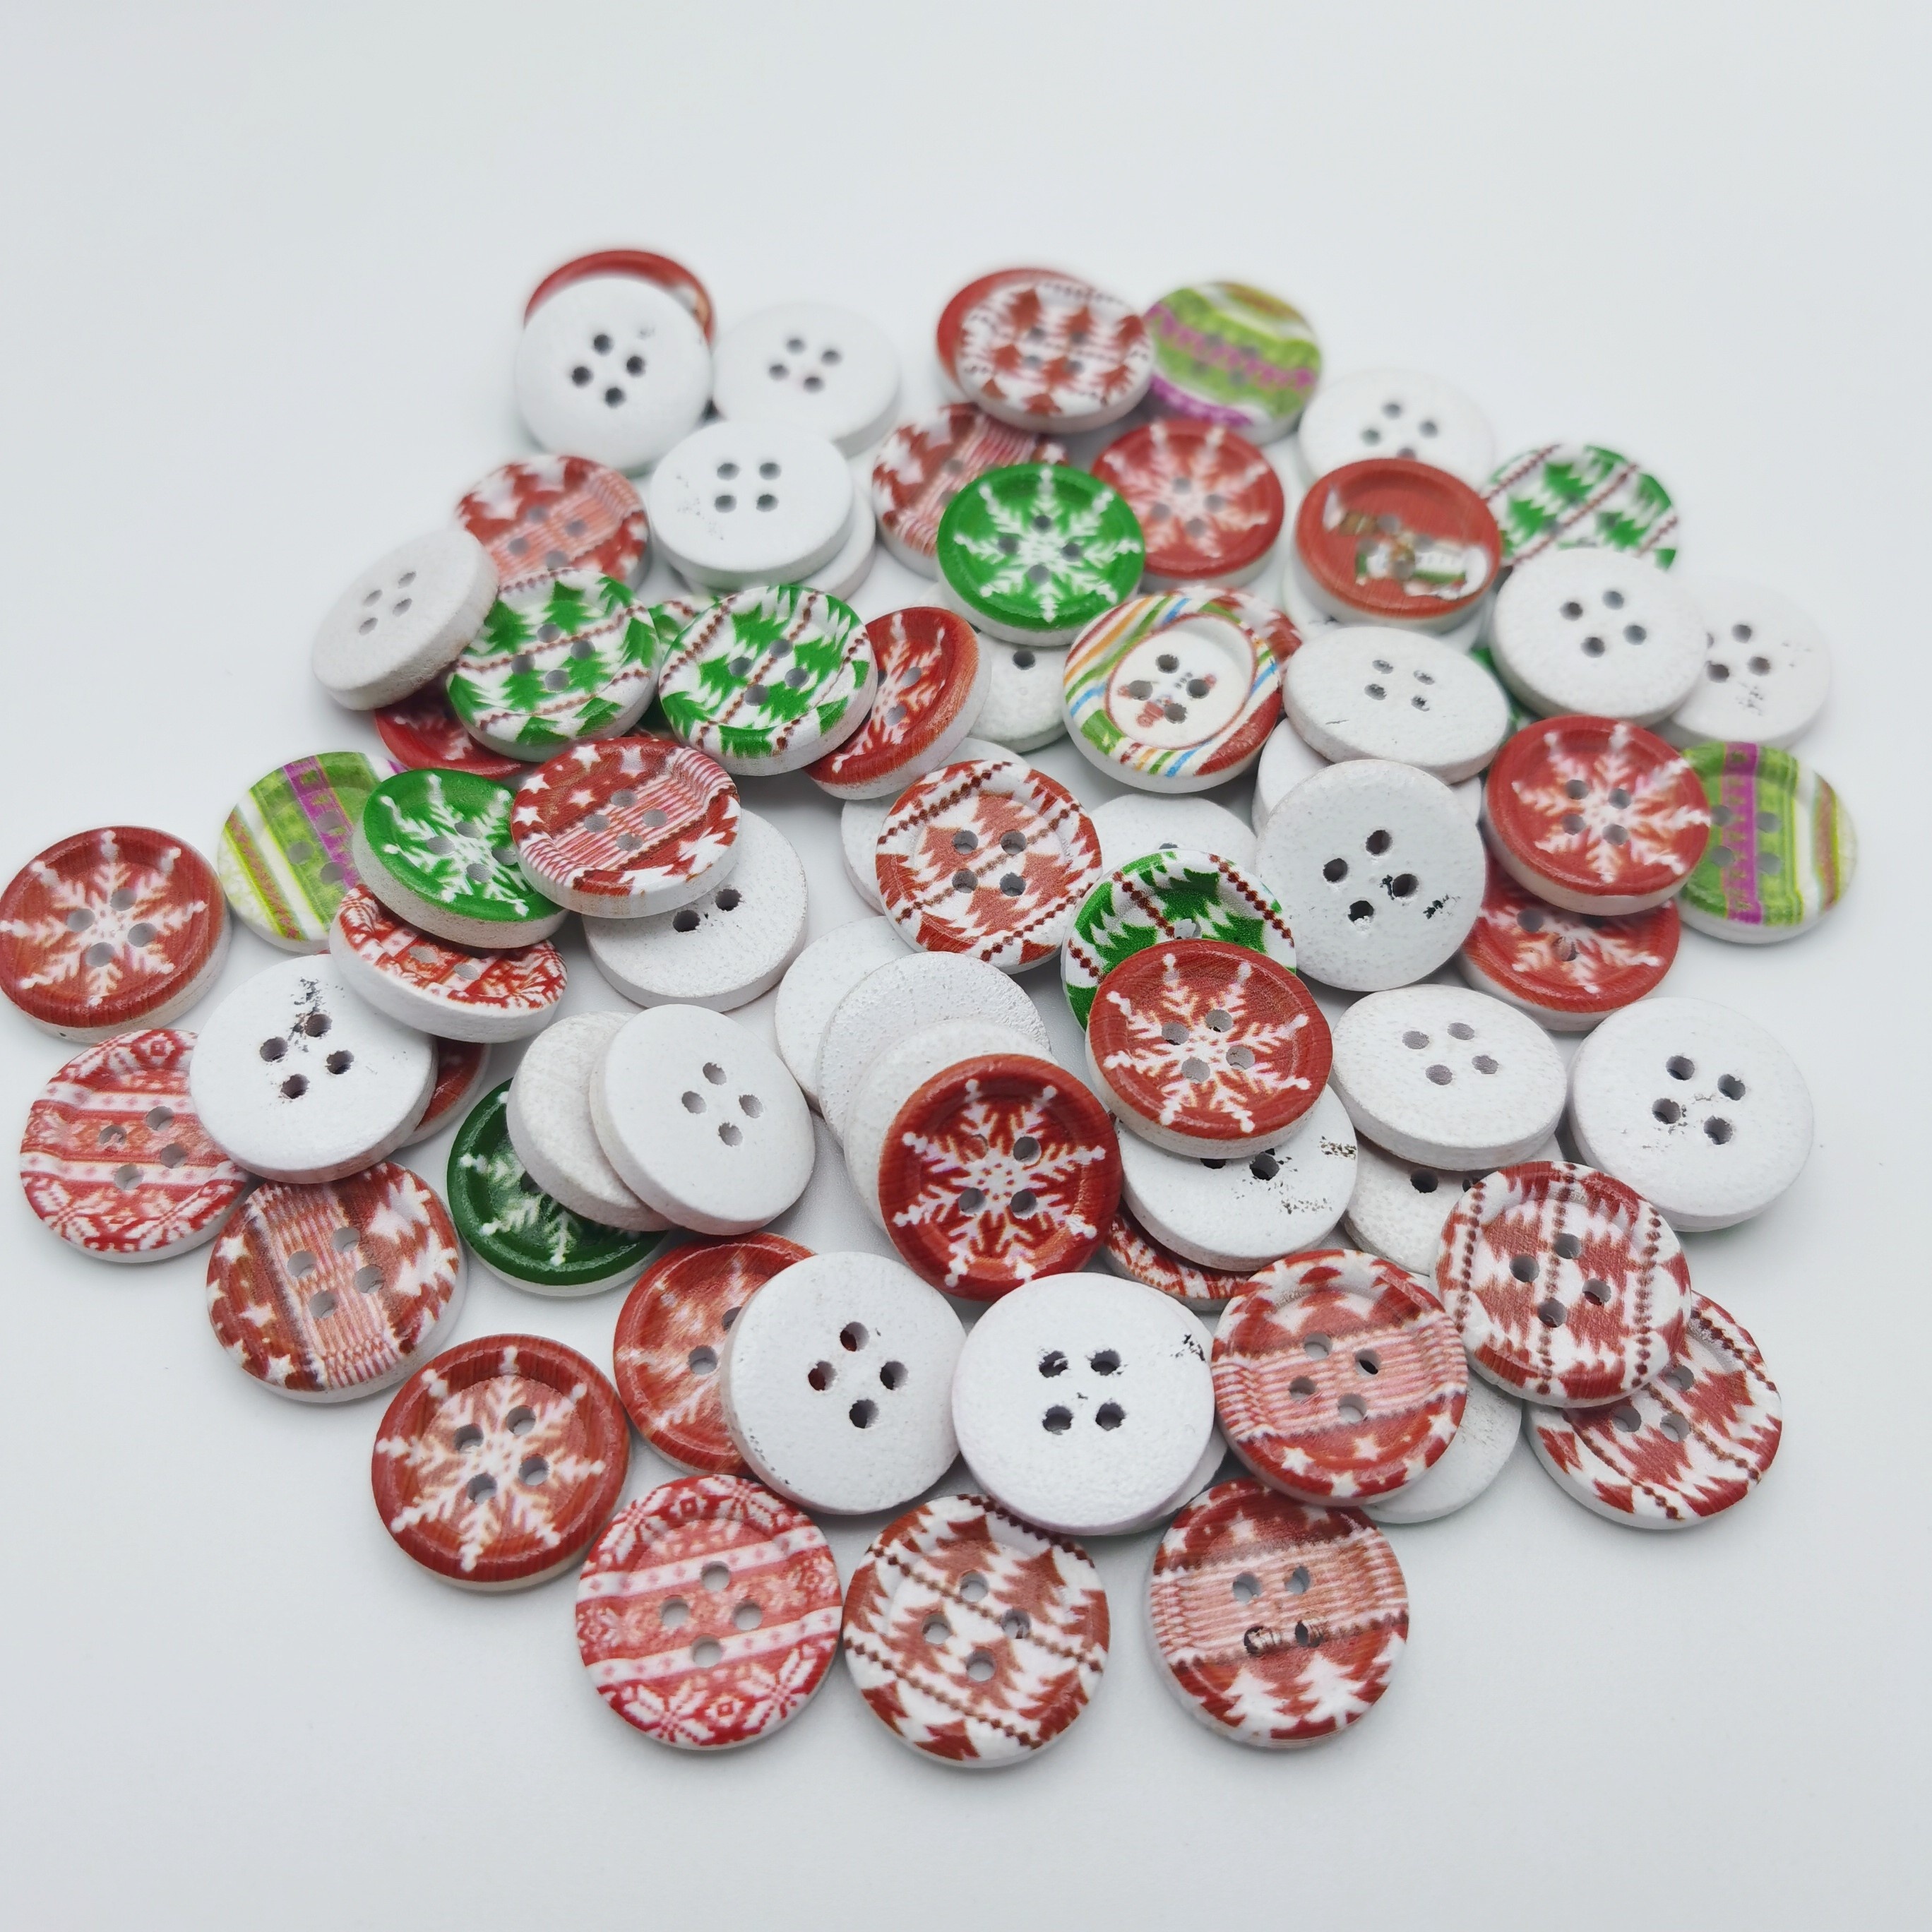 10 19mm white wood snowflake buttons, Christmas buttons, wooden button